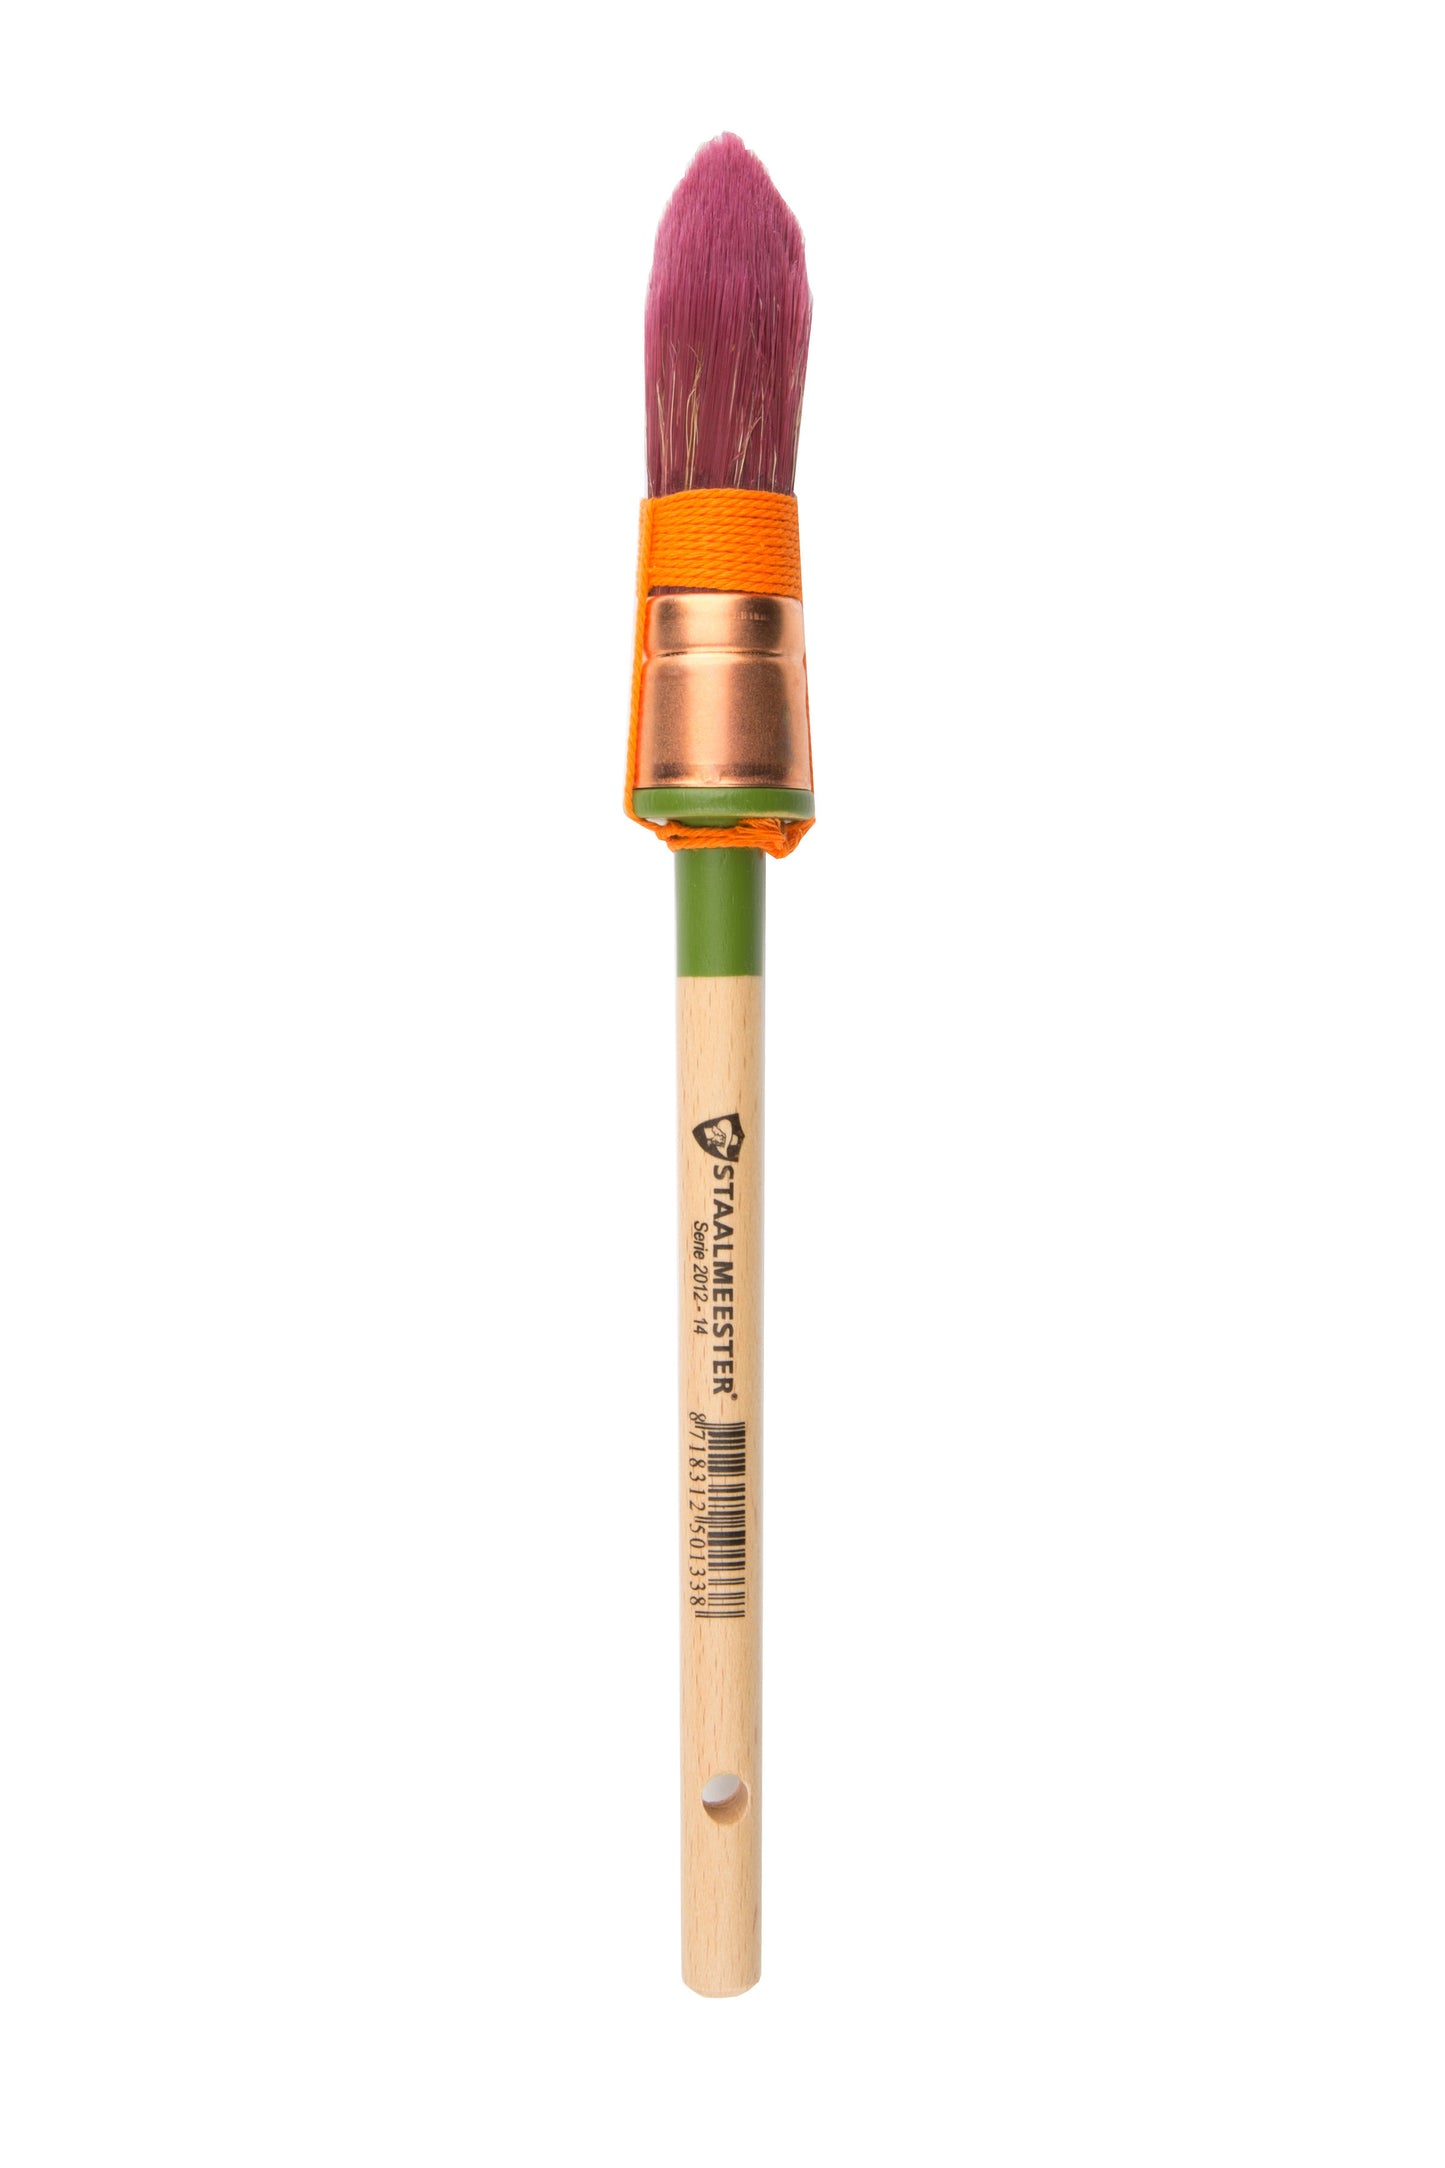 Staalmeester Pointed Sash Brush, 1.01.2012.14 - Fusion